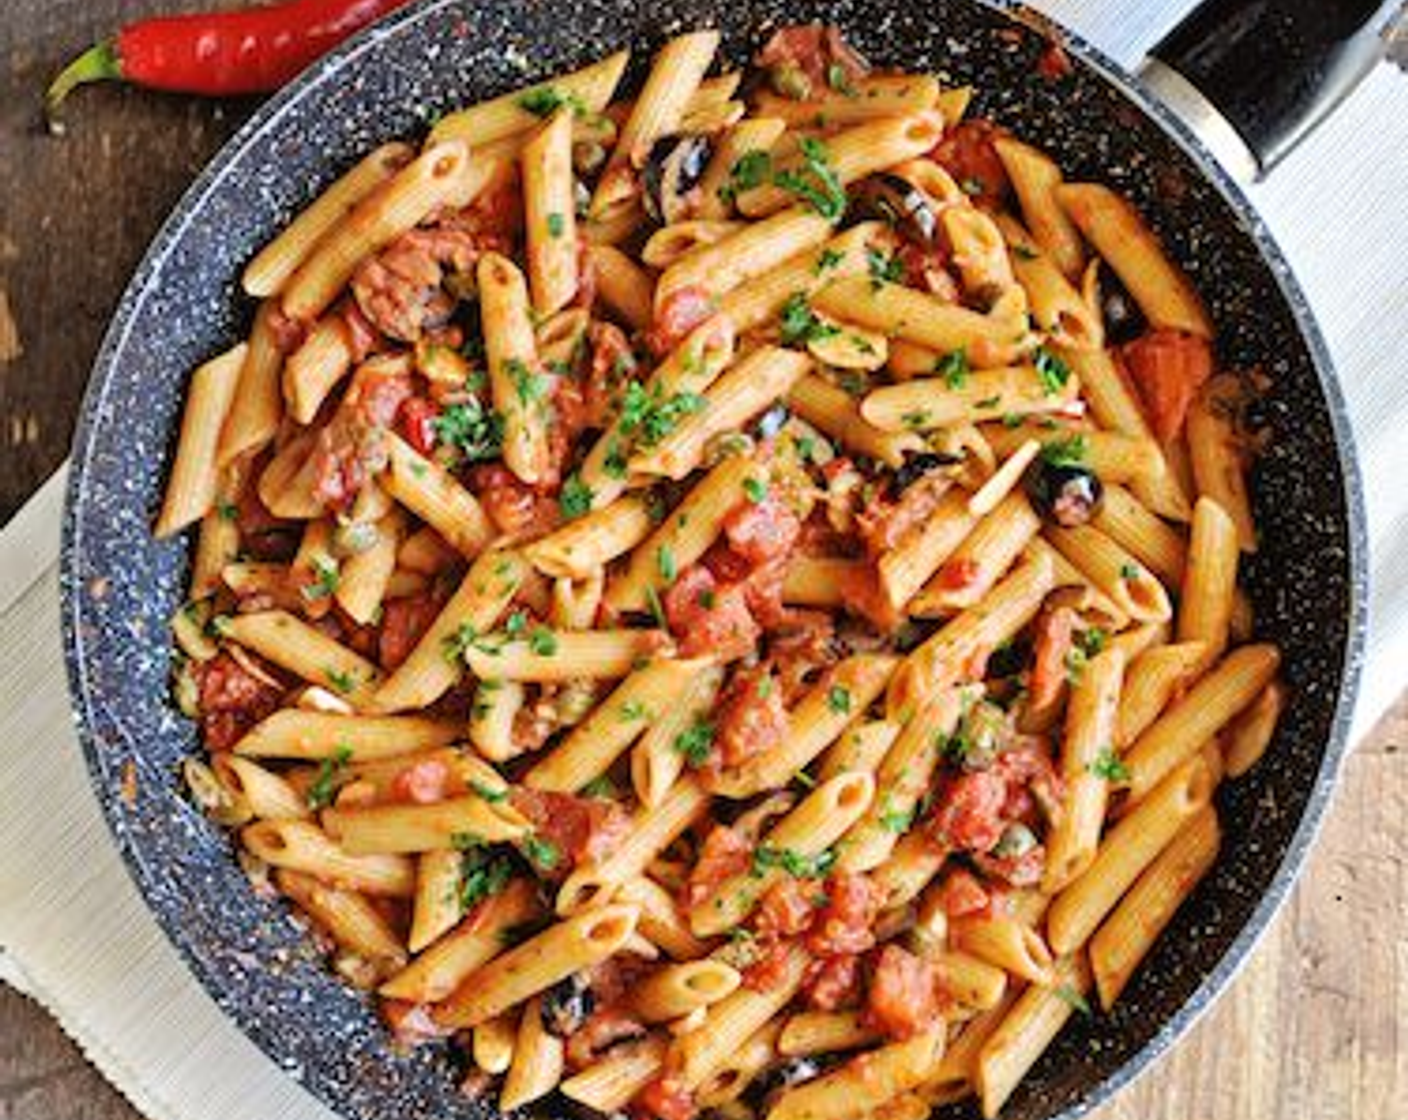 step 9 Once the water begins to boil add Whole Wheat Penne Pasta (2 cups) and cook until al dente, drain the pasta and add it to the pan with the sauce, mix it all together until well combined, remove from the heat and garnish with Fresh Parsley (1 handful). Enjoy!